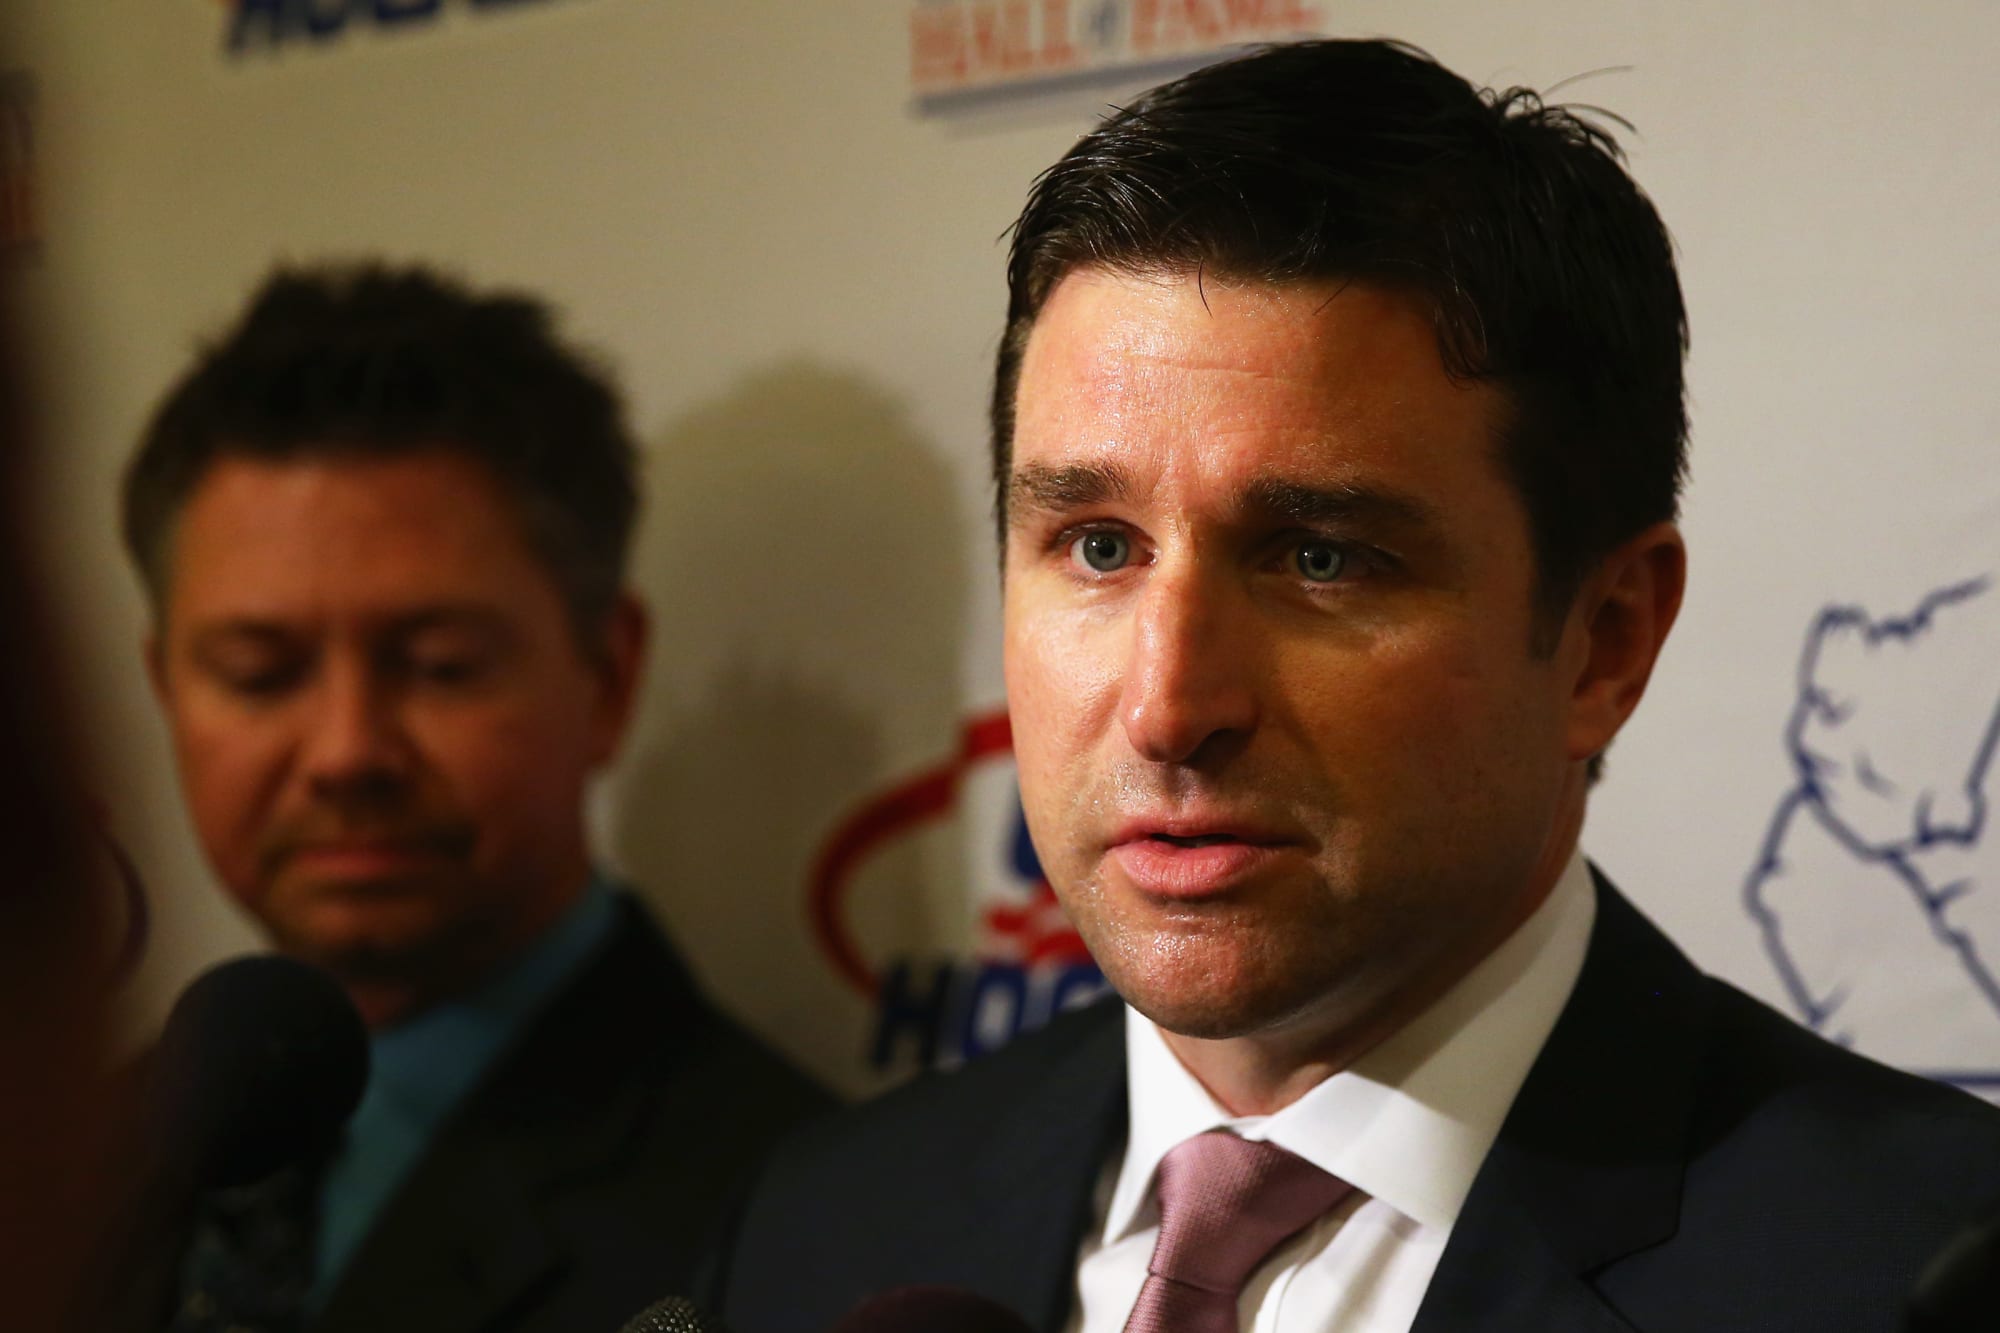 Rangers GM, Chris Drury gives important updates on 2023 roster ahead of  training camp